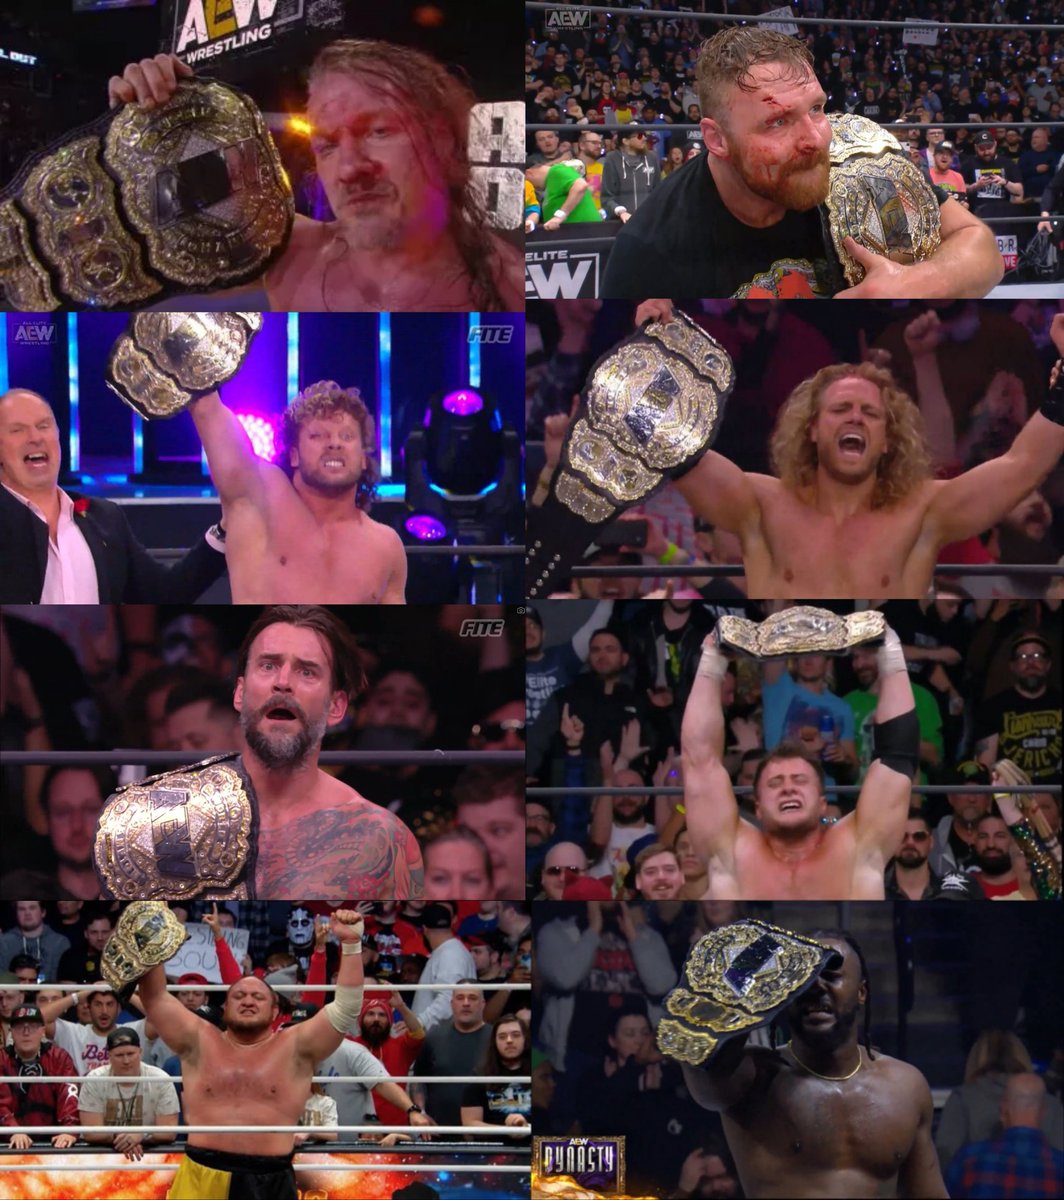 Every AEW World Champion in the promotion's 5 year history. Swerve Strickland joins the club as the 8th man to hold this prestigious title.